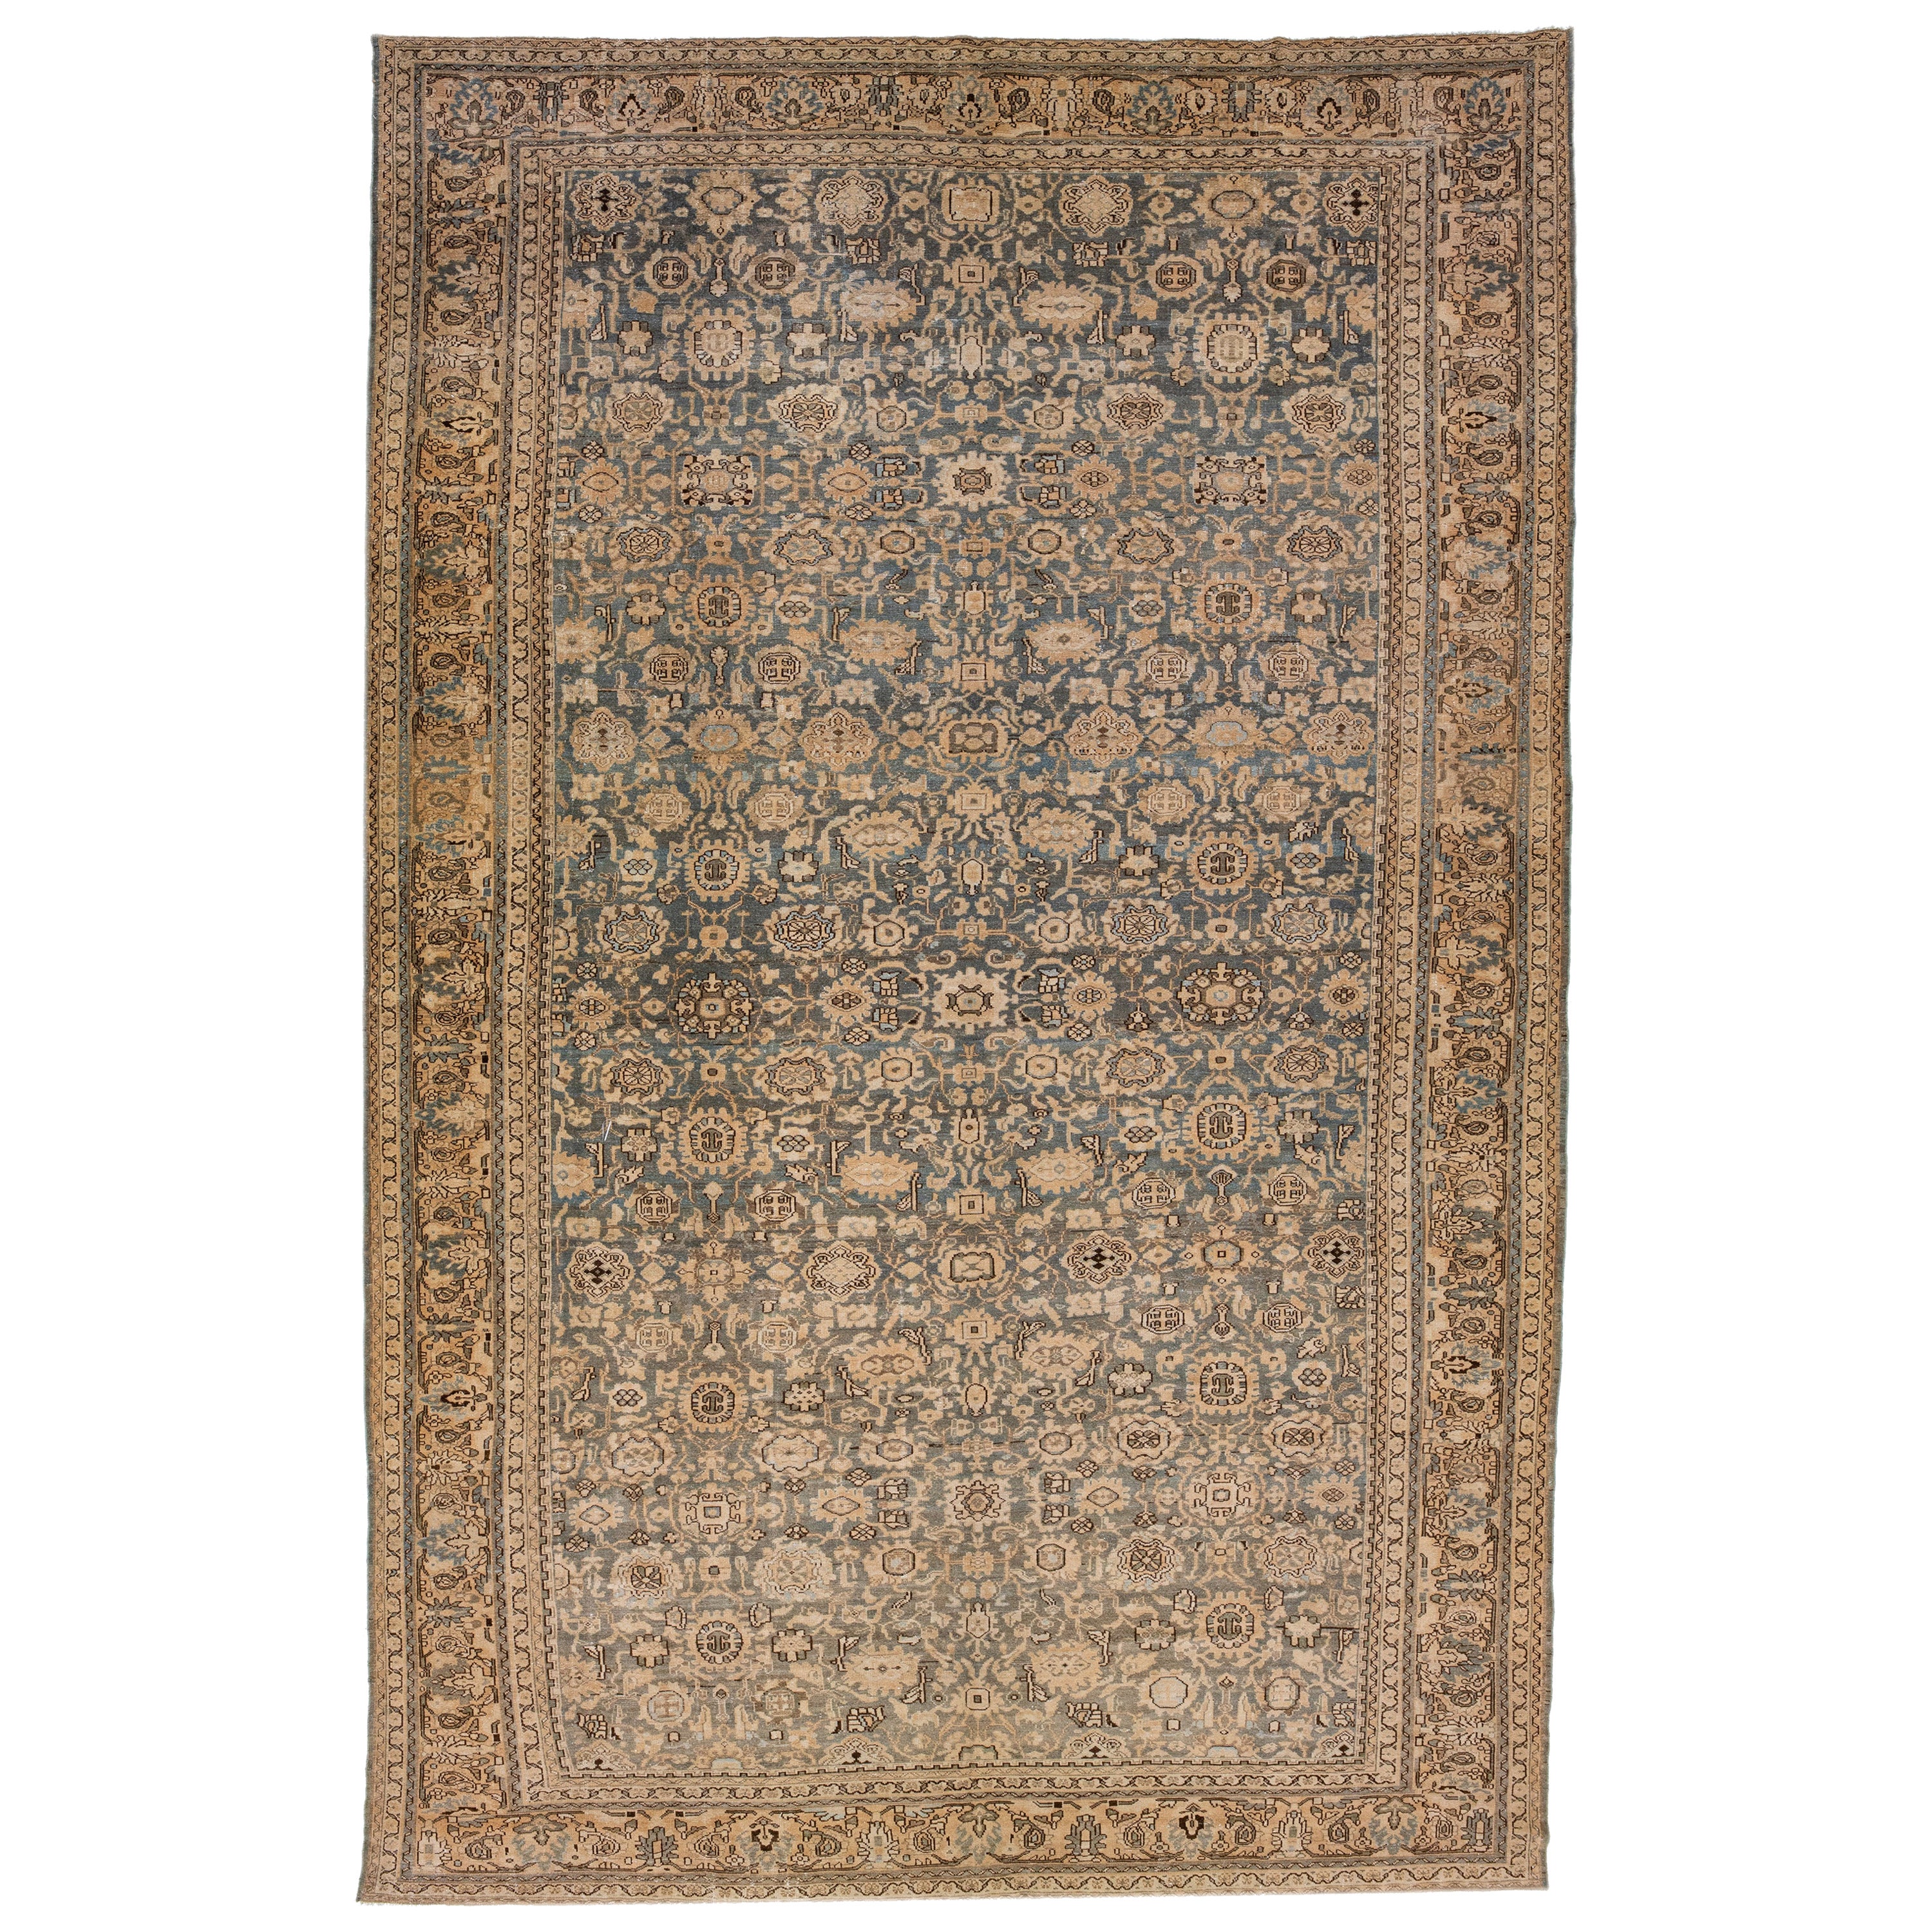 1900s Handmade Persian Malayer Allover Wool Rug with Muted Tones